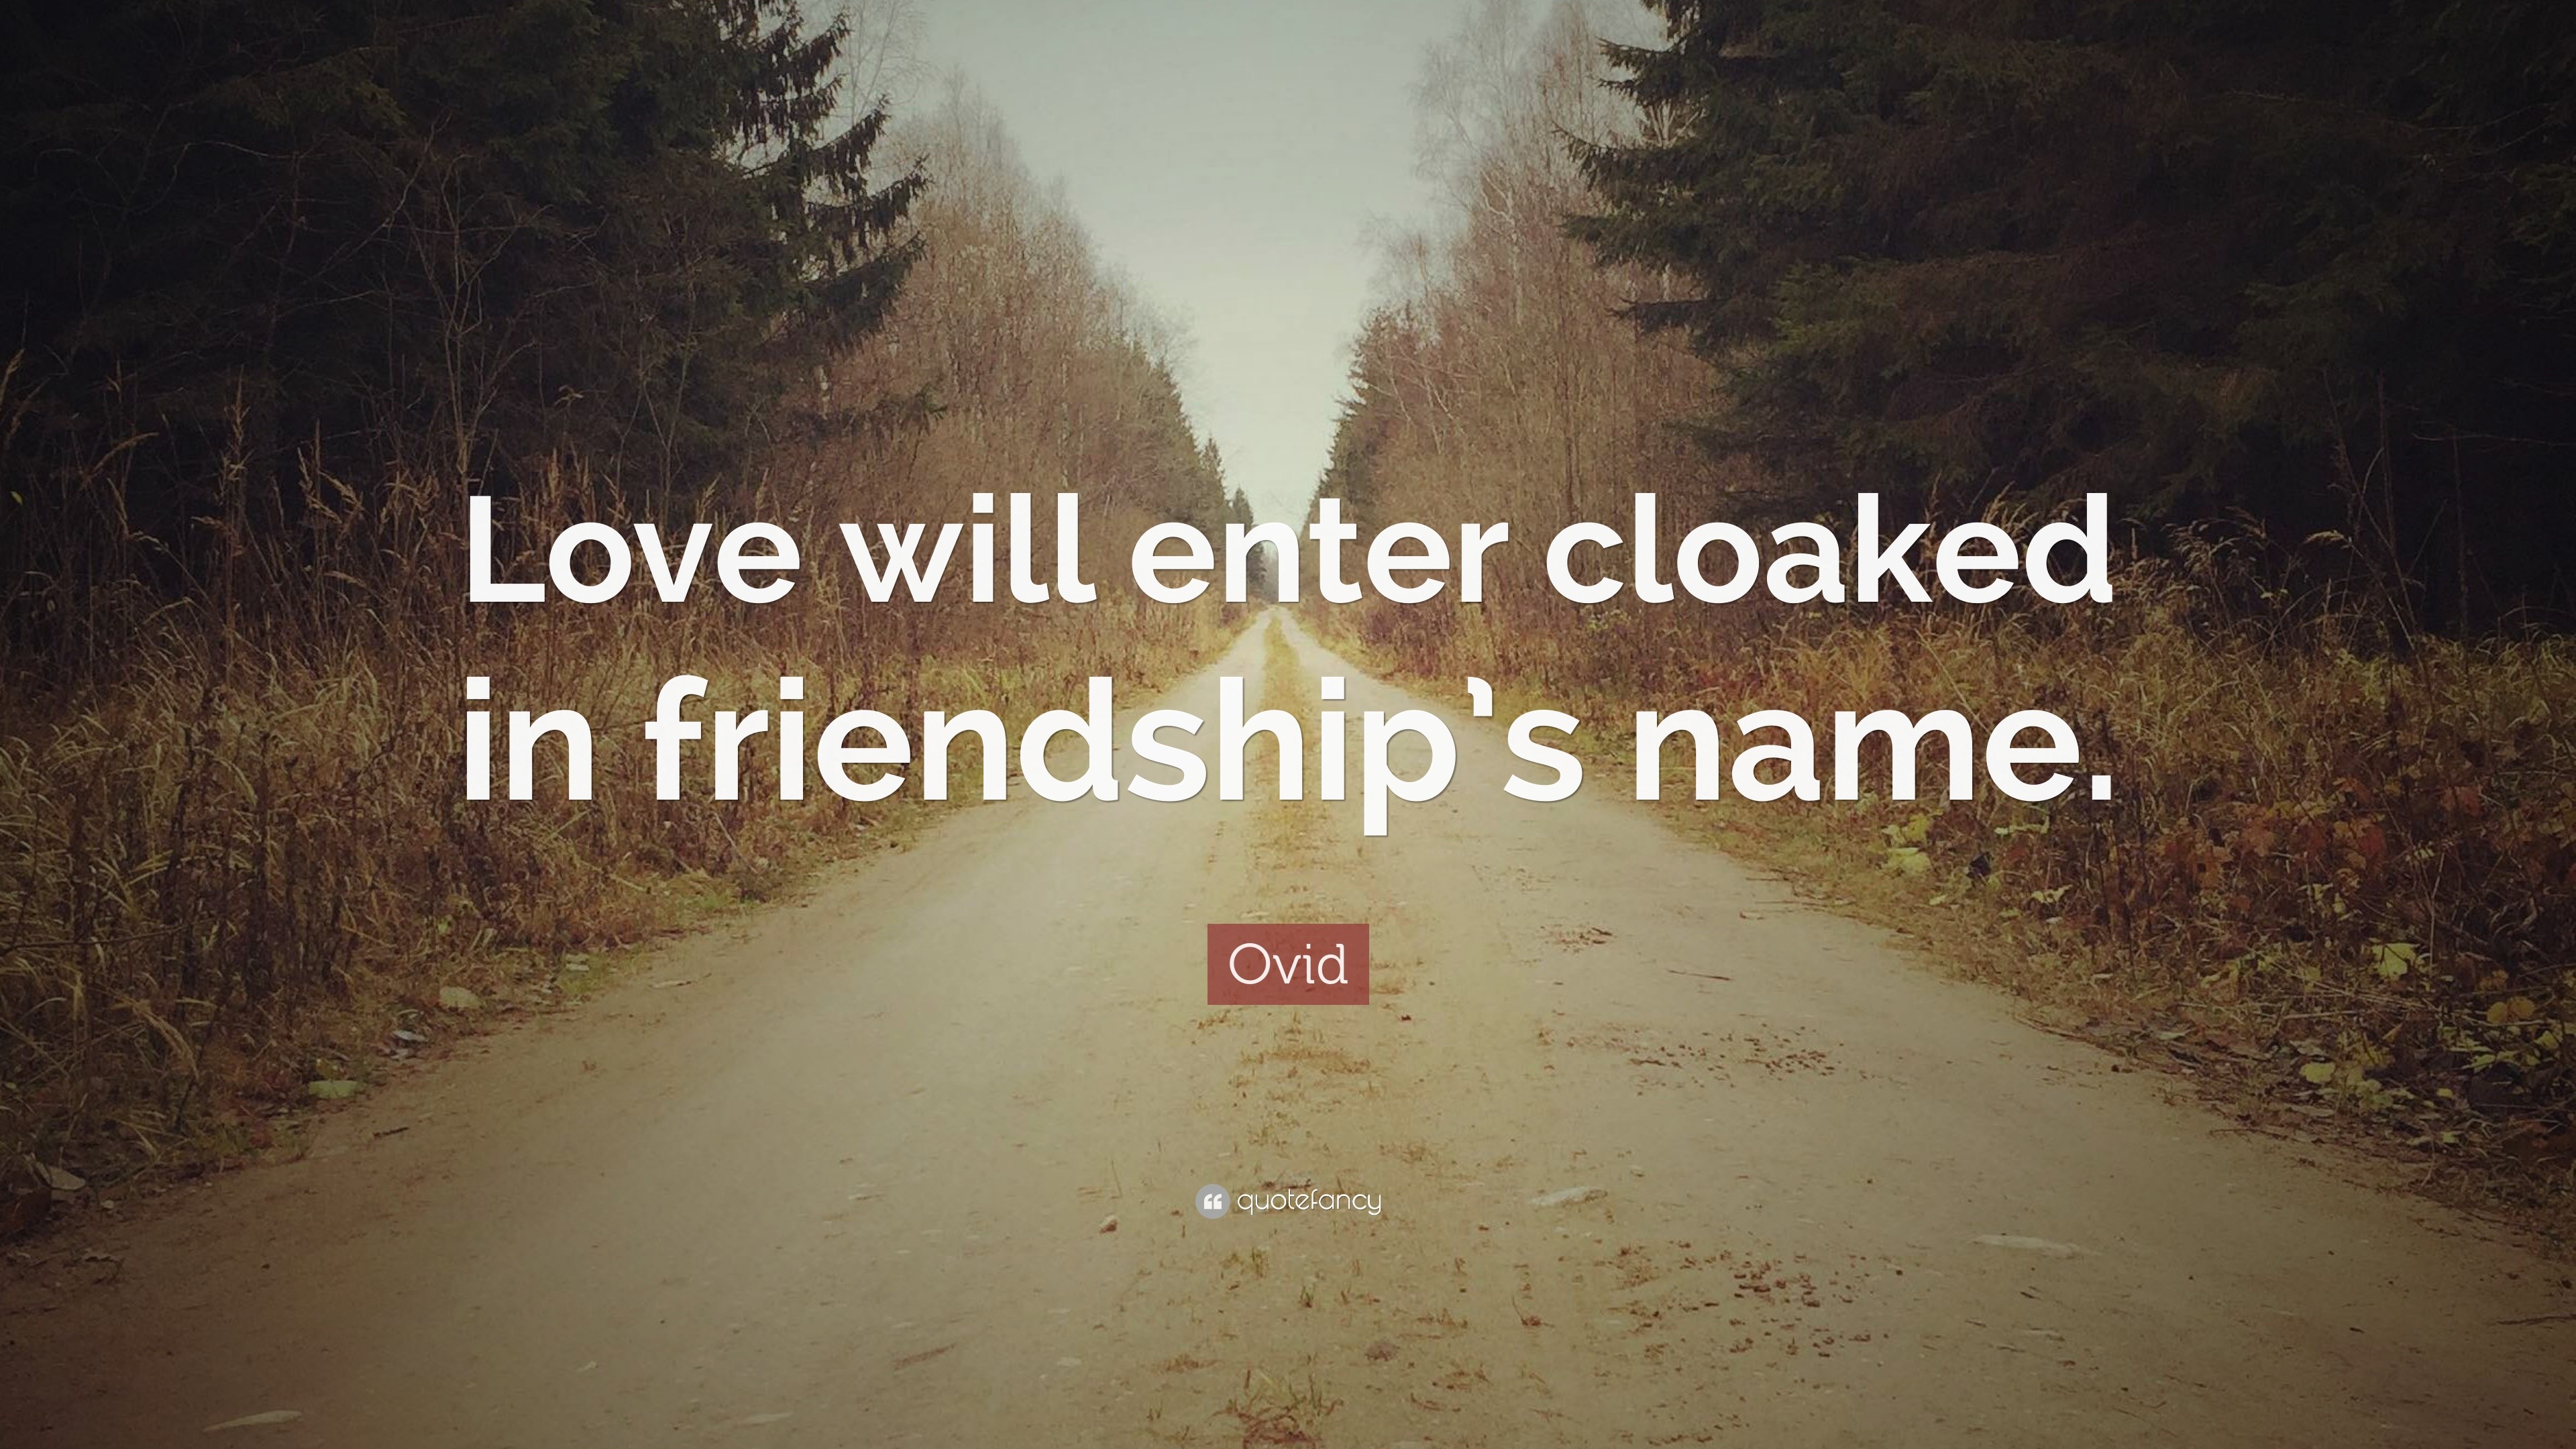 Ovid Quote “Love will enter cloaked in friendship’s name.”